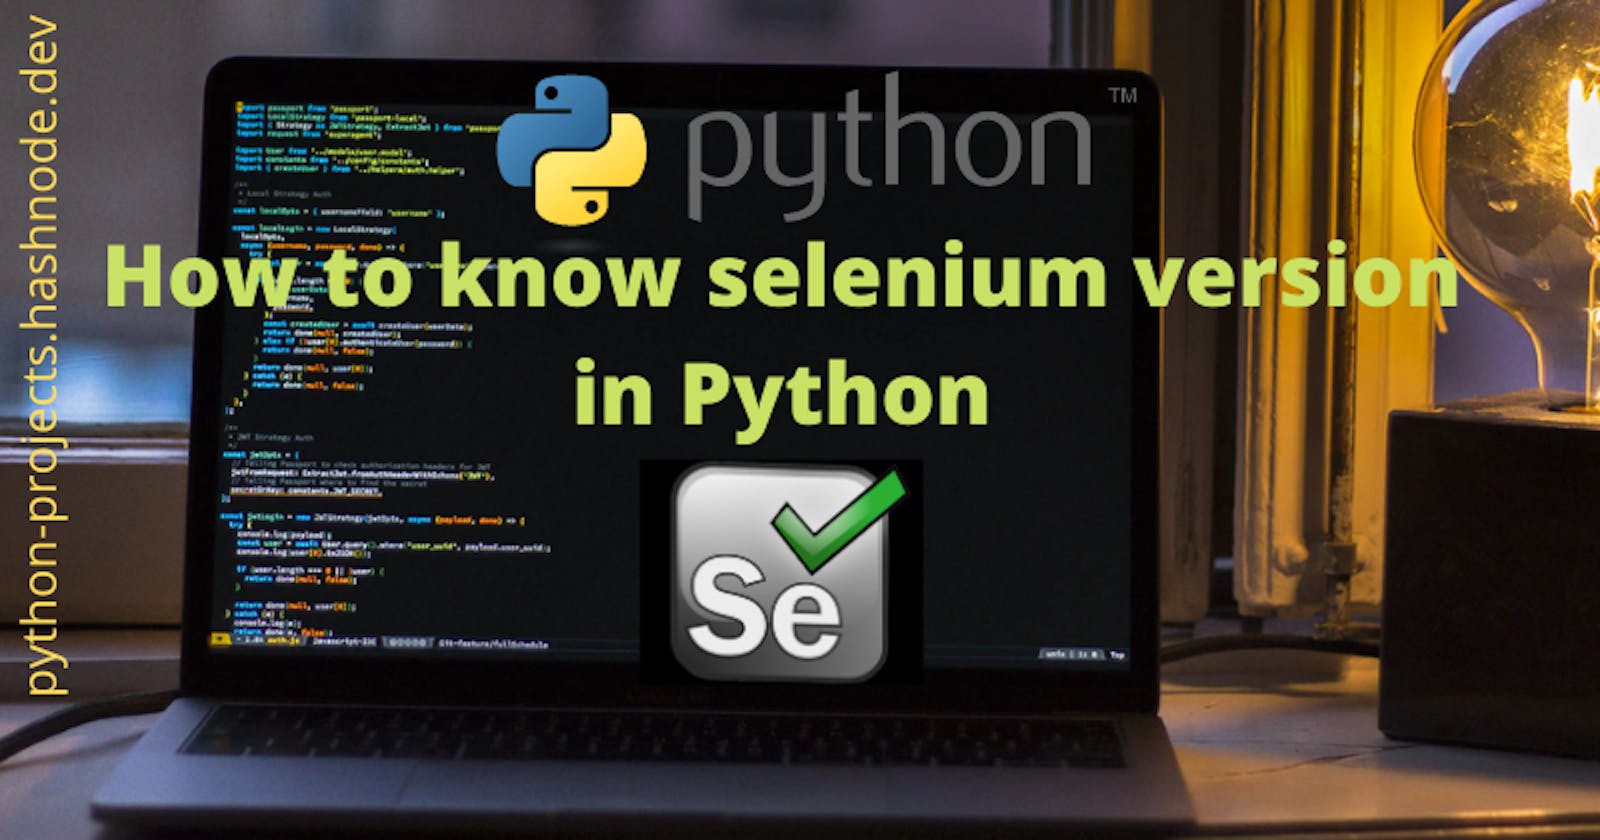 How to check selenium version in Python